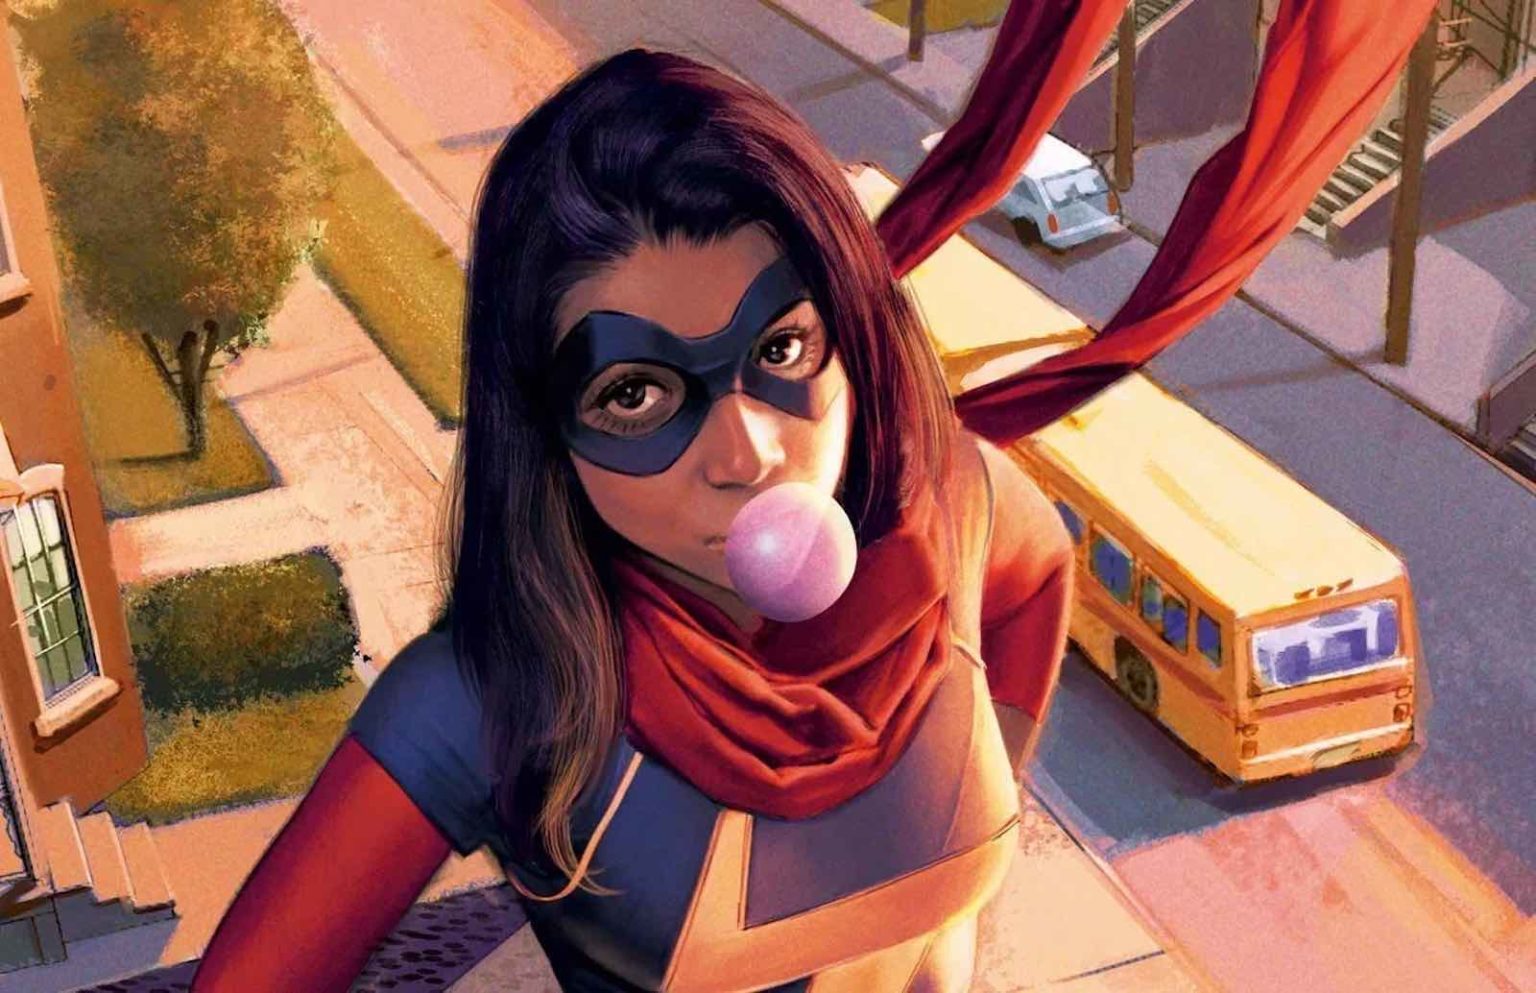 Marvel’s got an entire universe of exciting characters. Here are the best superheroes Marvel has not yet introduced on the screen, like young Ms. Marvel.